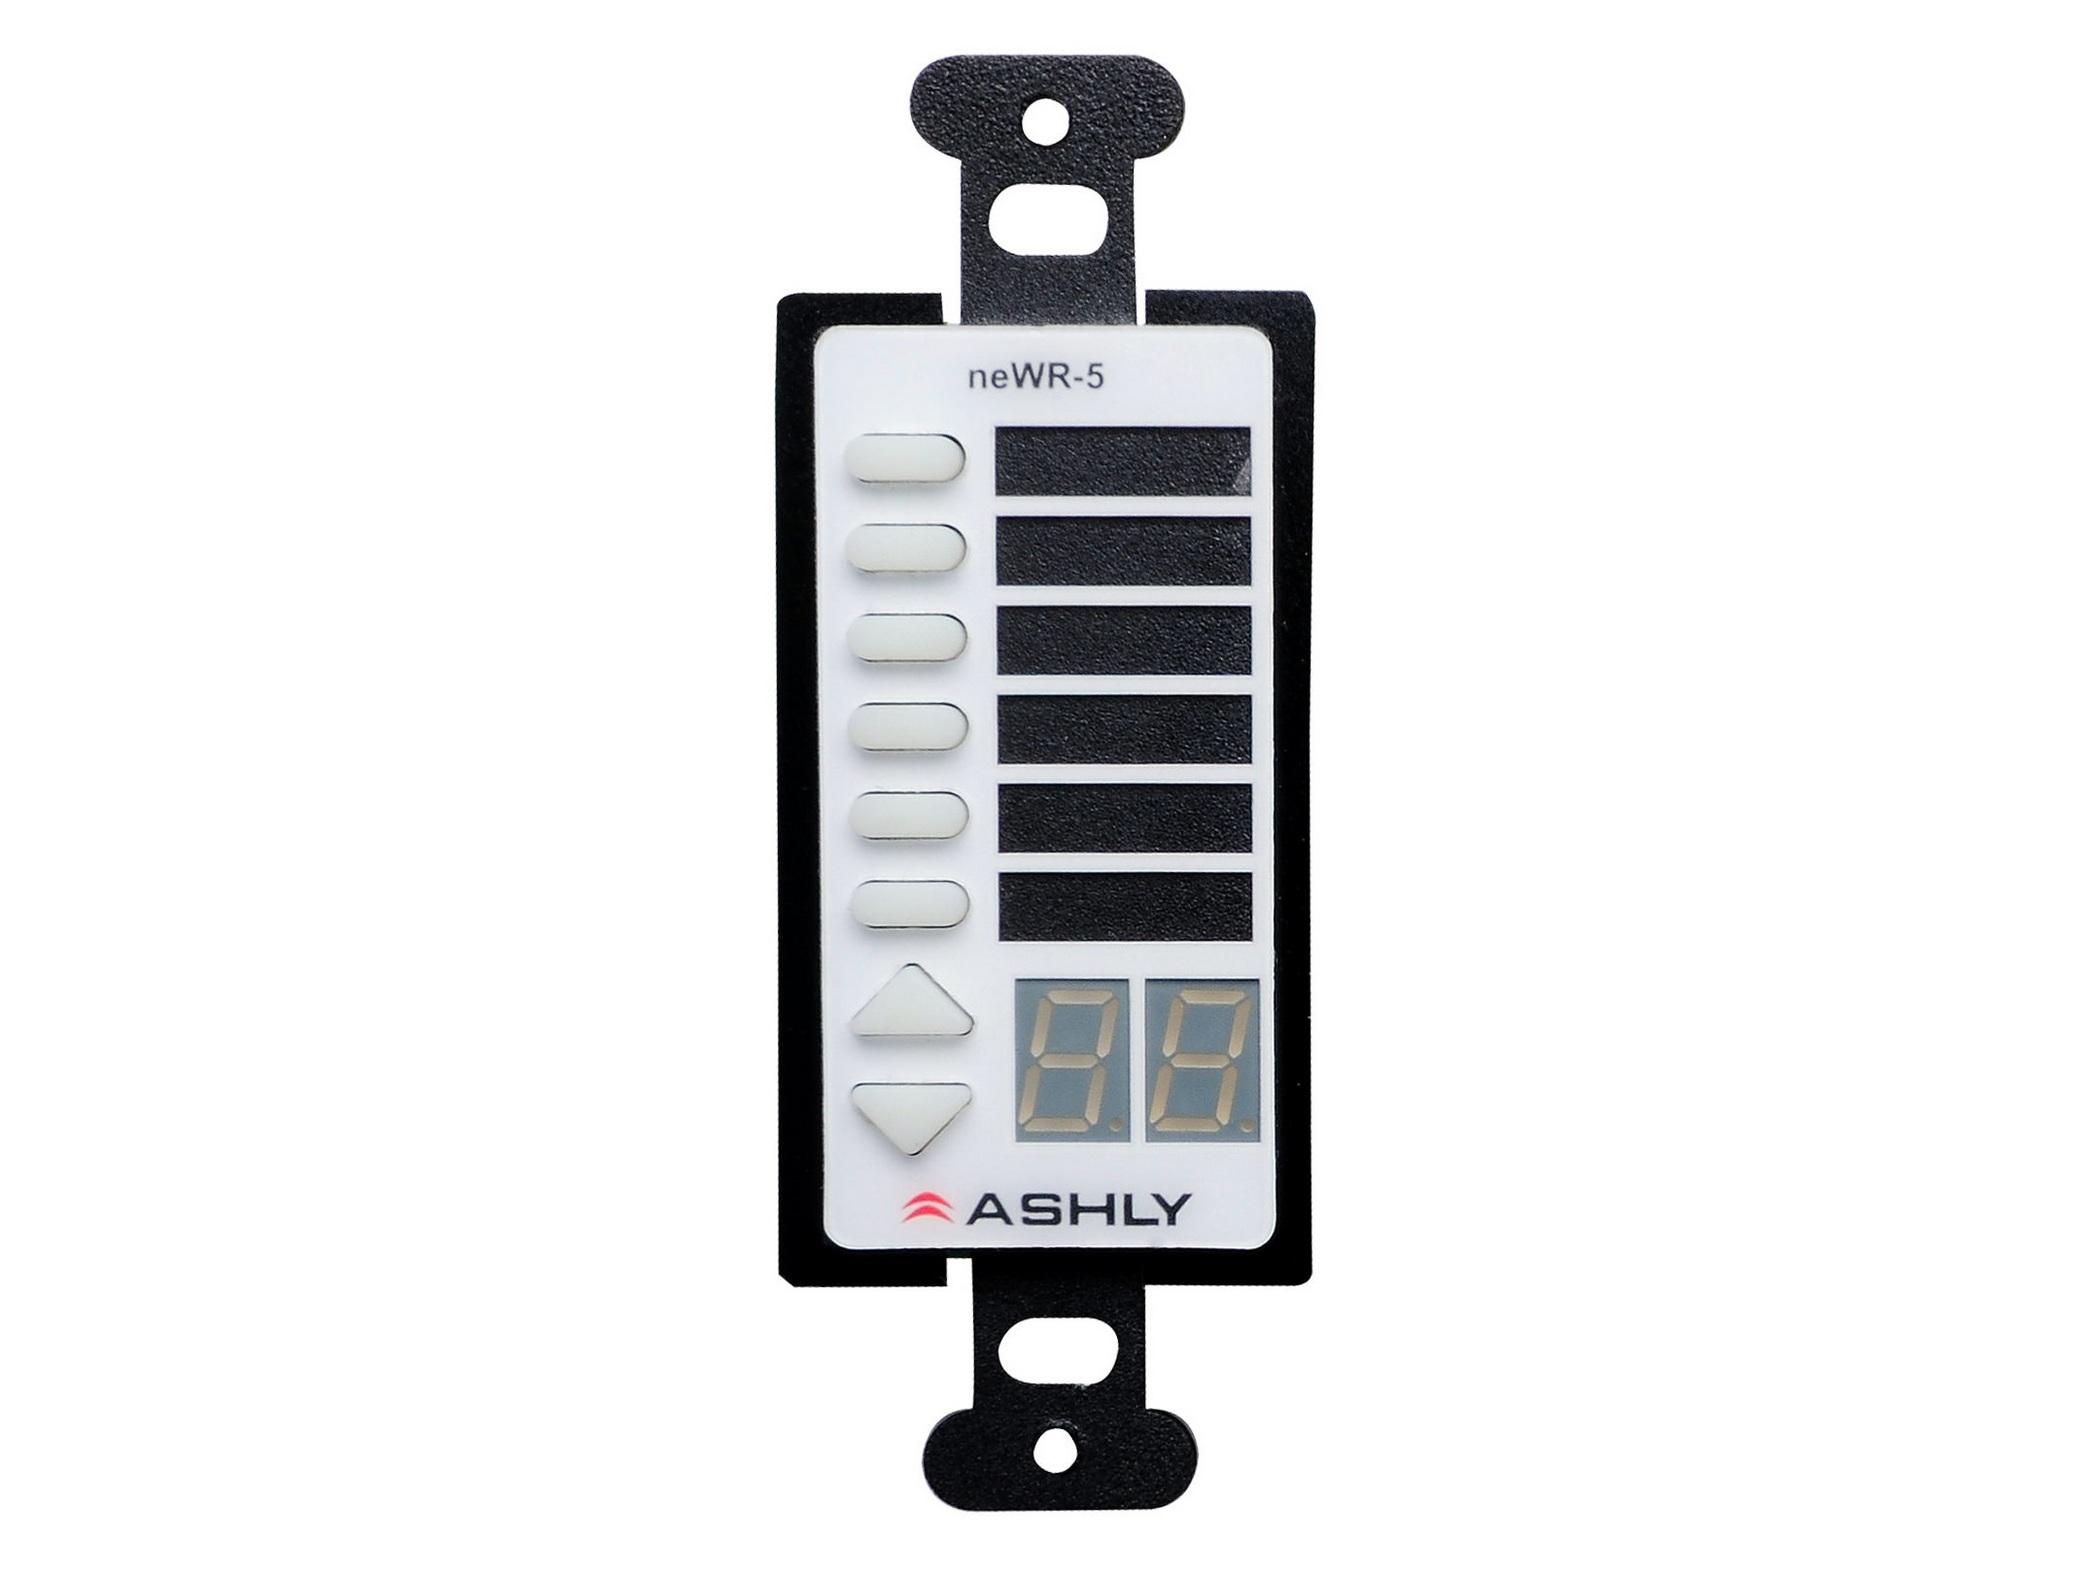 neWR-5 Wall Remote/Network Programmable Multi-Function by Ashly